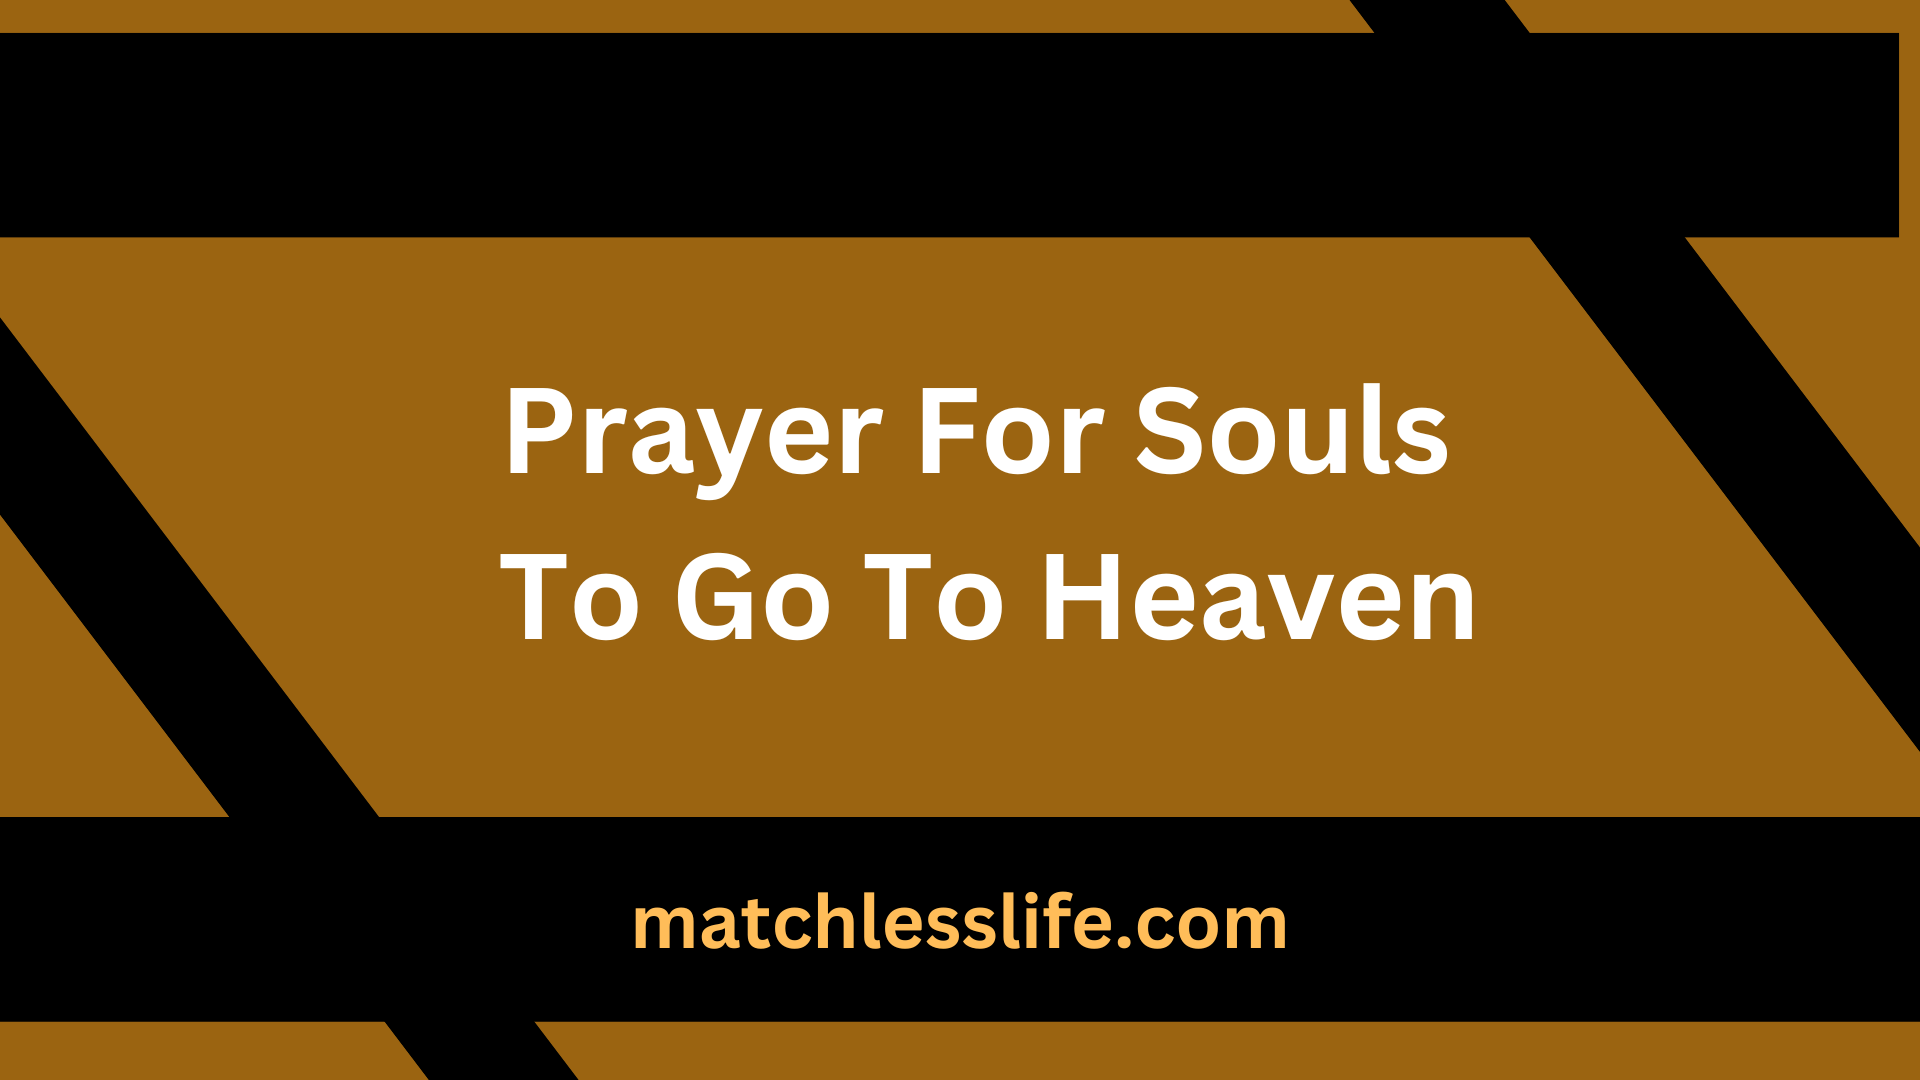 Prayer For Souls To Go To Heaven